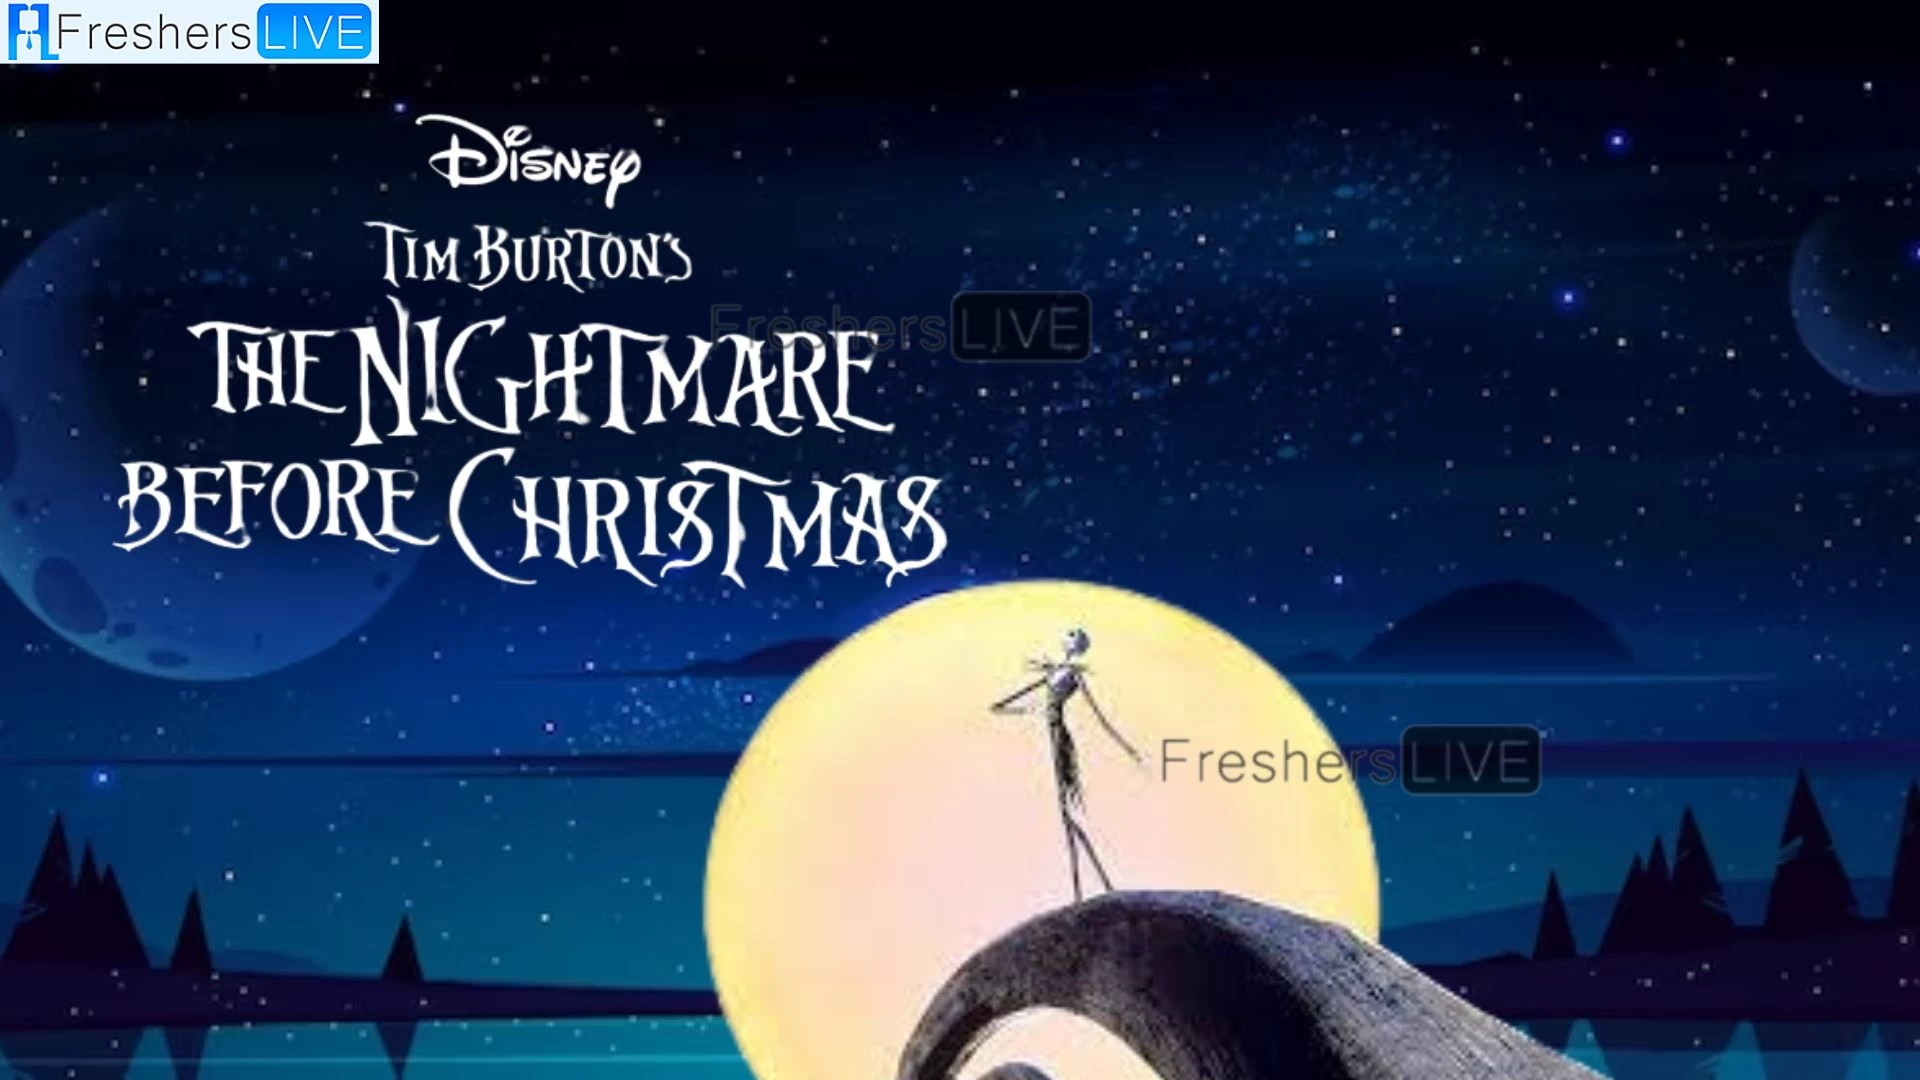 Is Nightmare Before Christmas Returning to Theaters? Nightmare Before Christmas Re-Release Date